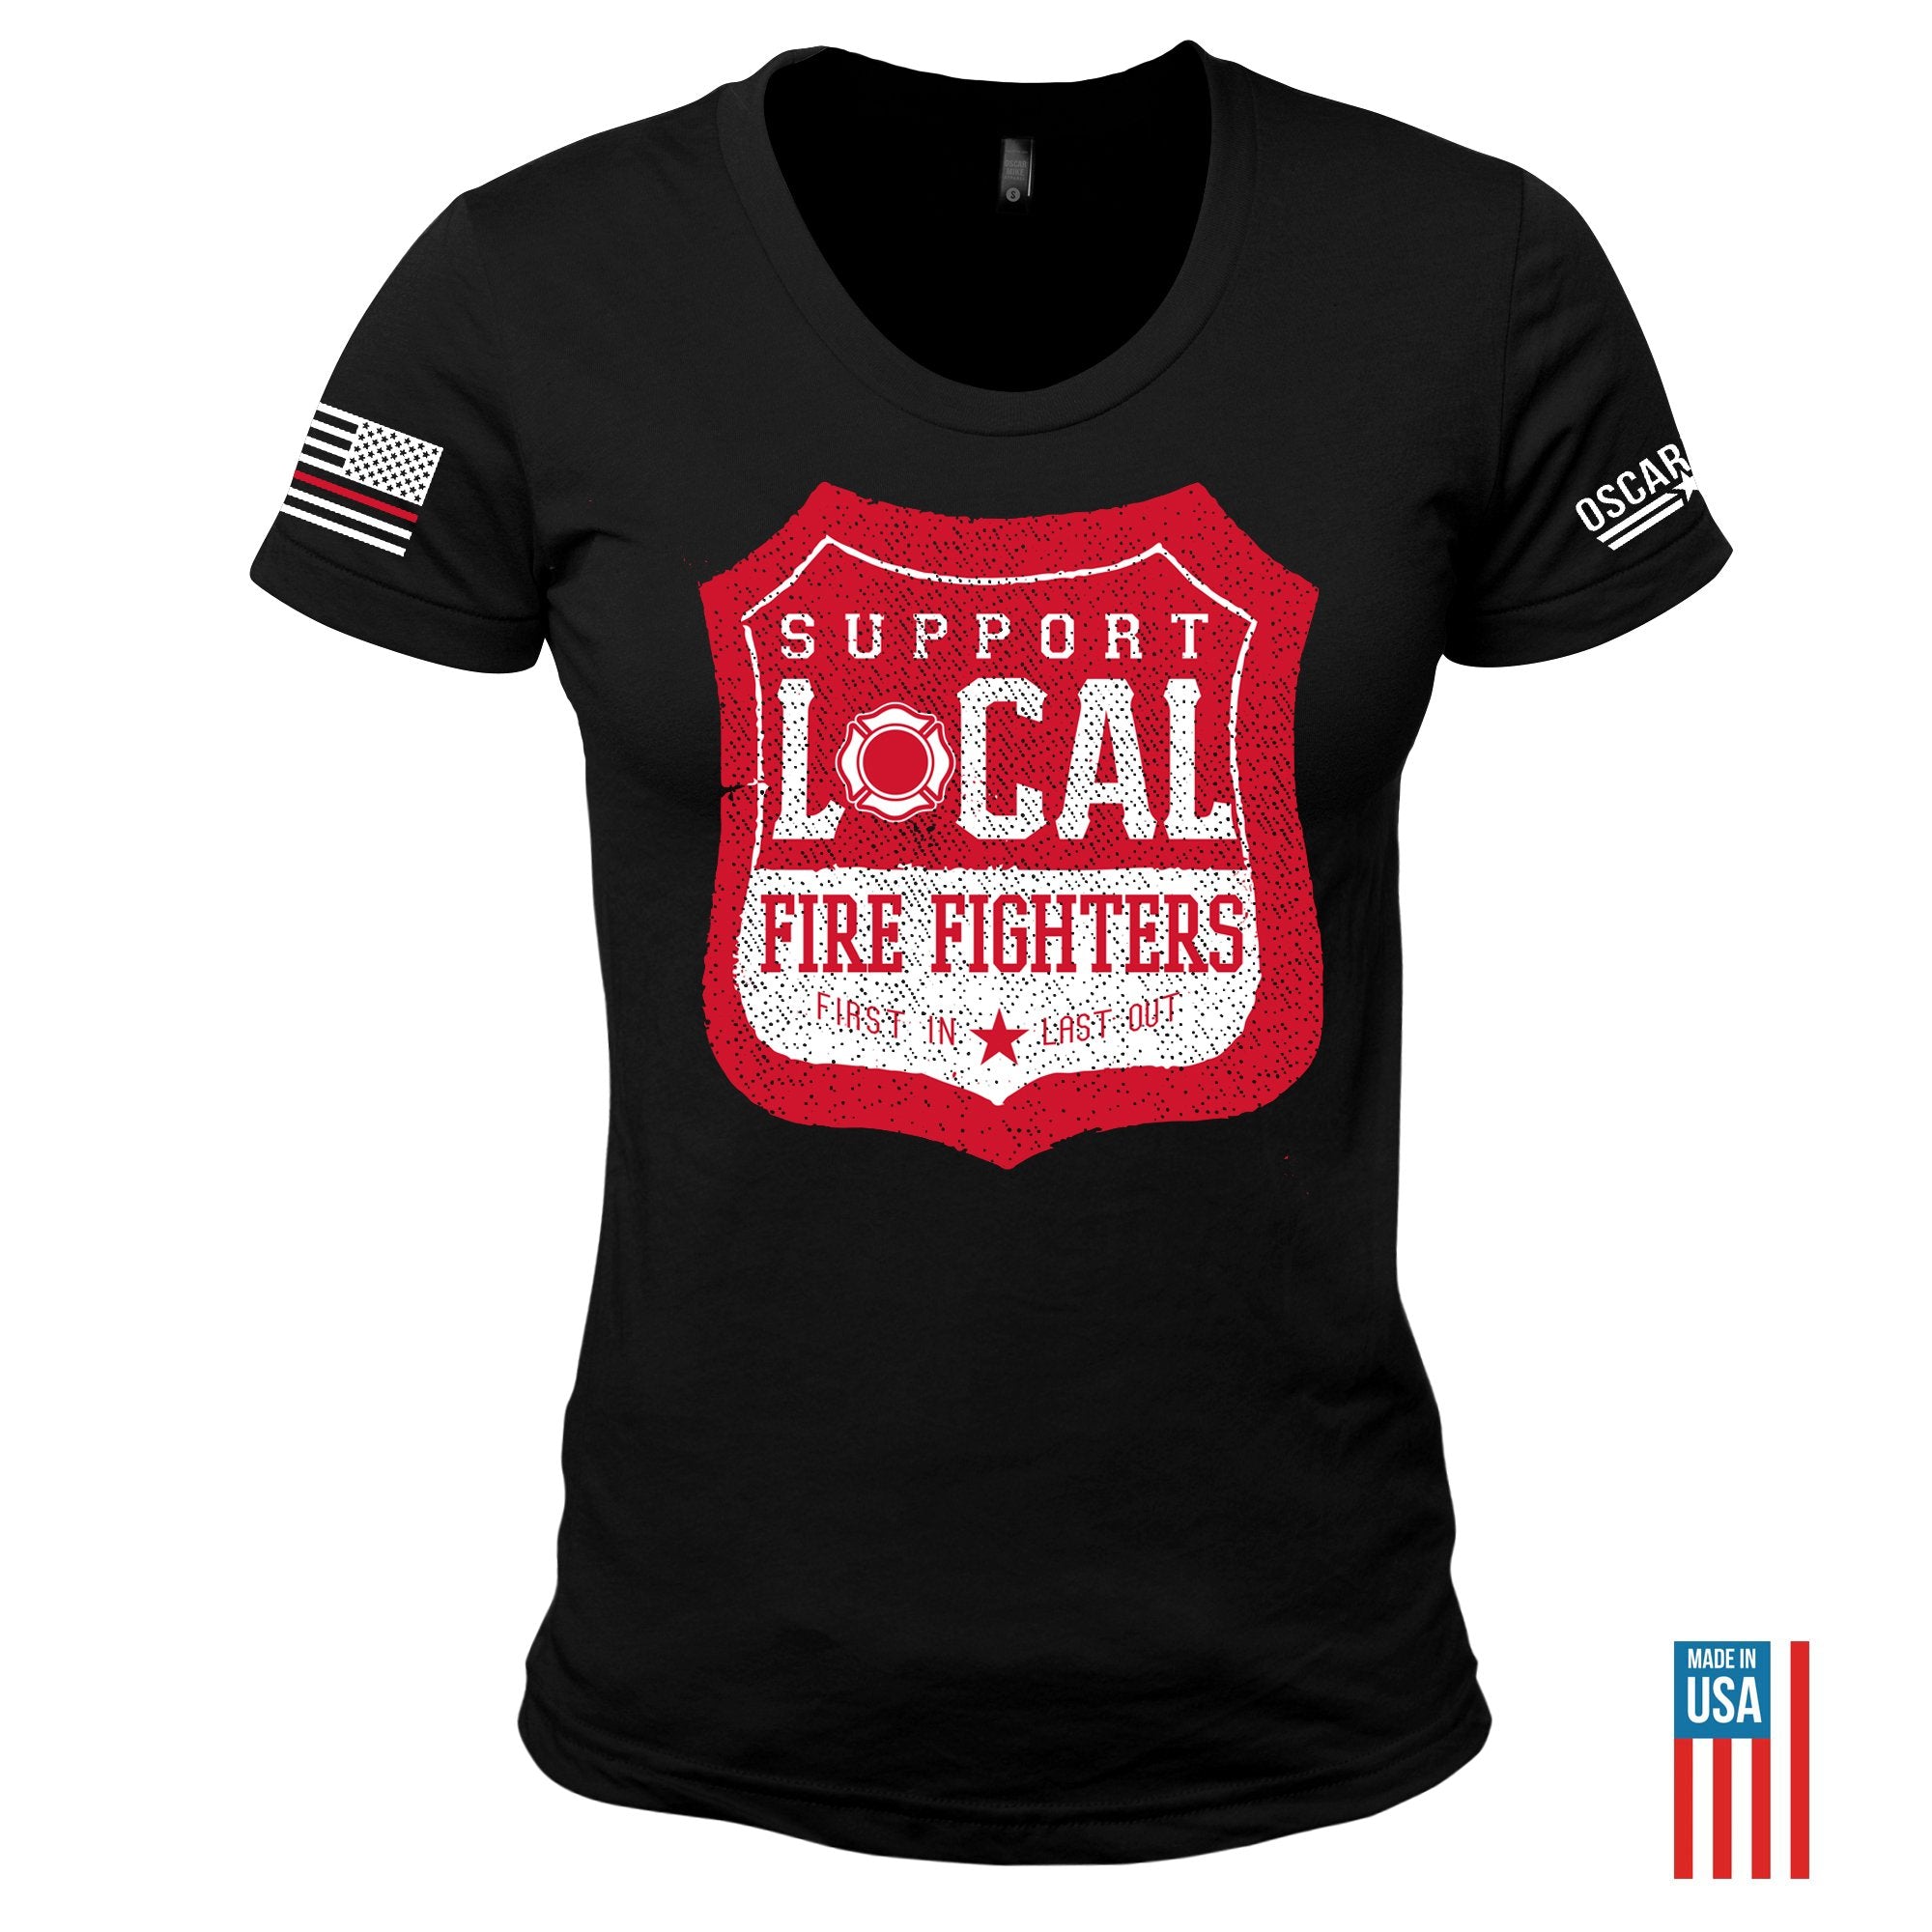 Women's Support Local Firefighters